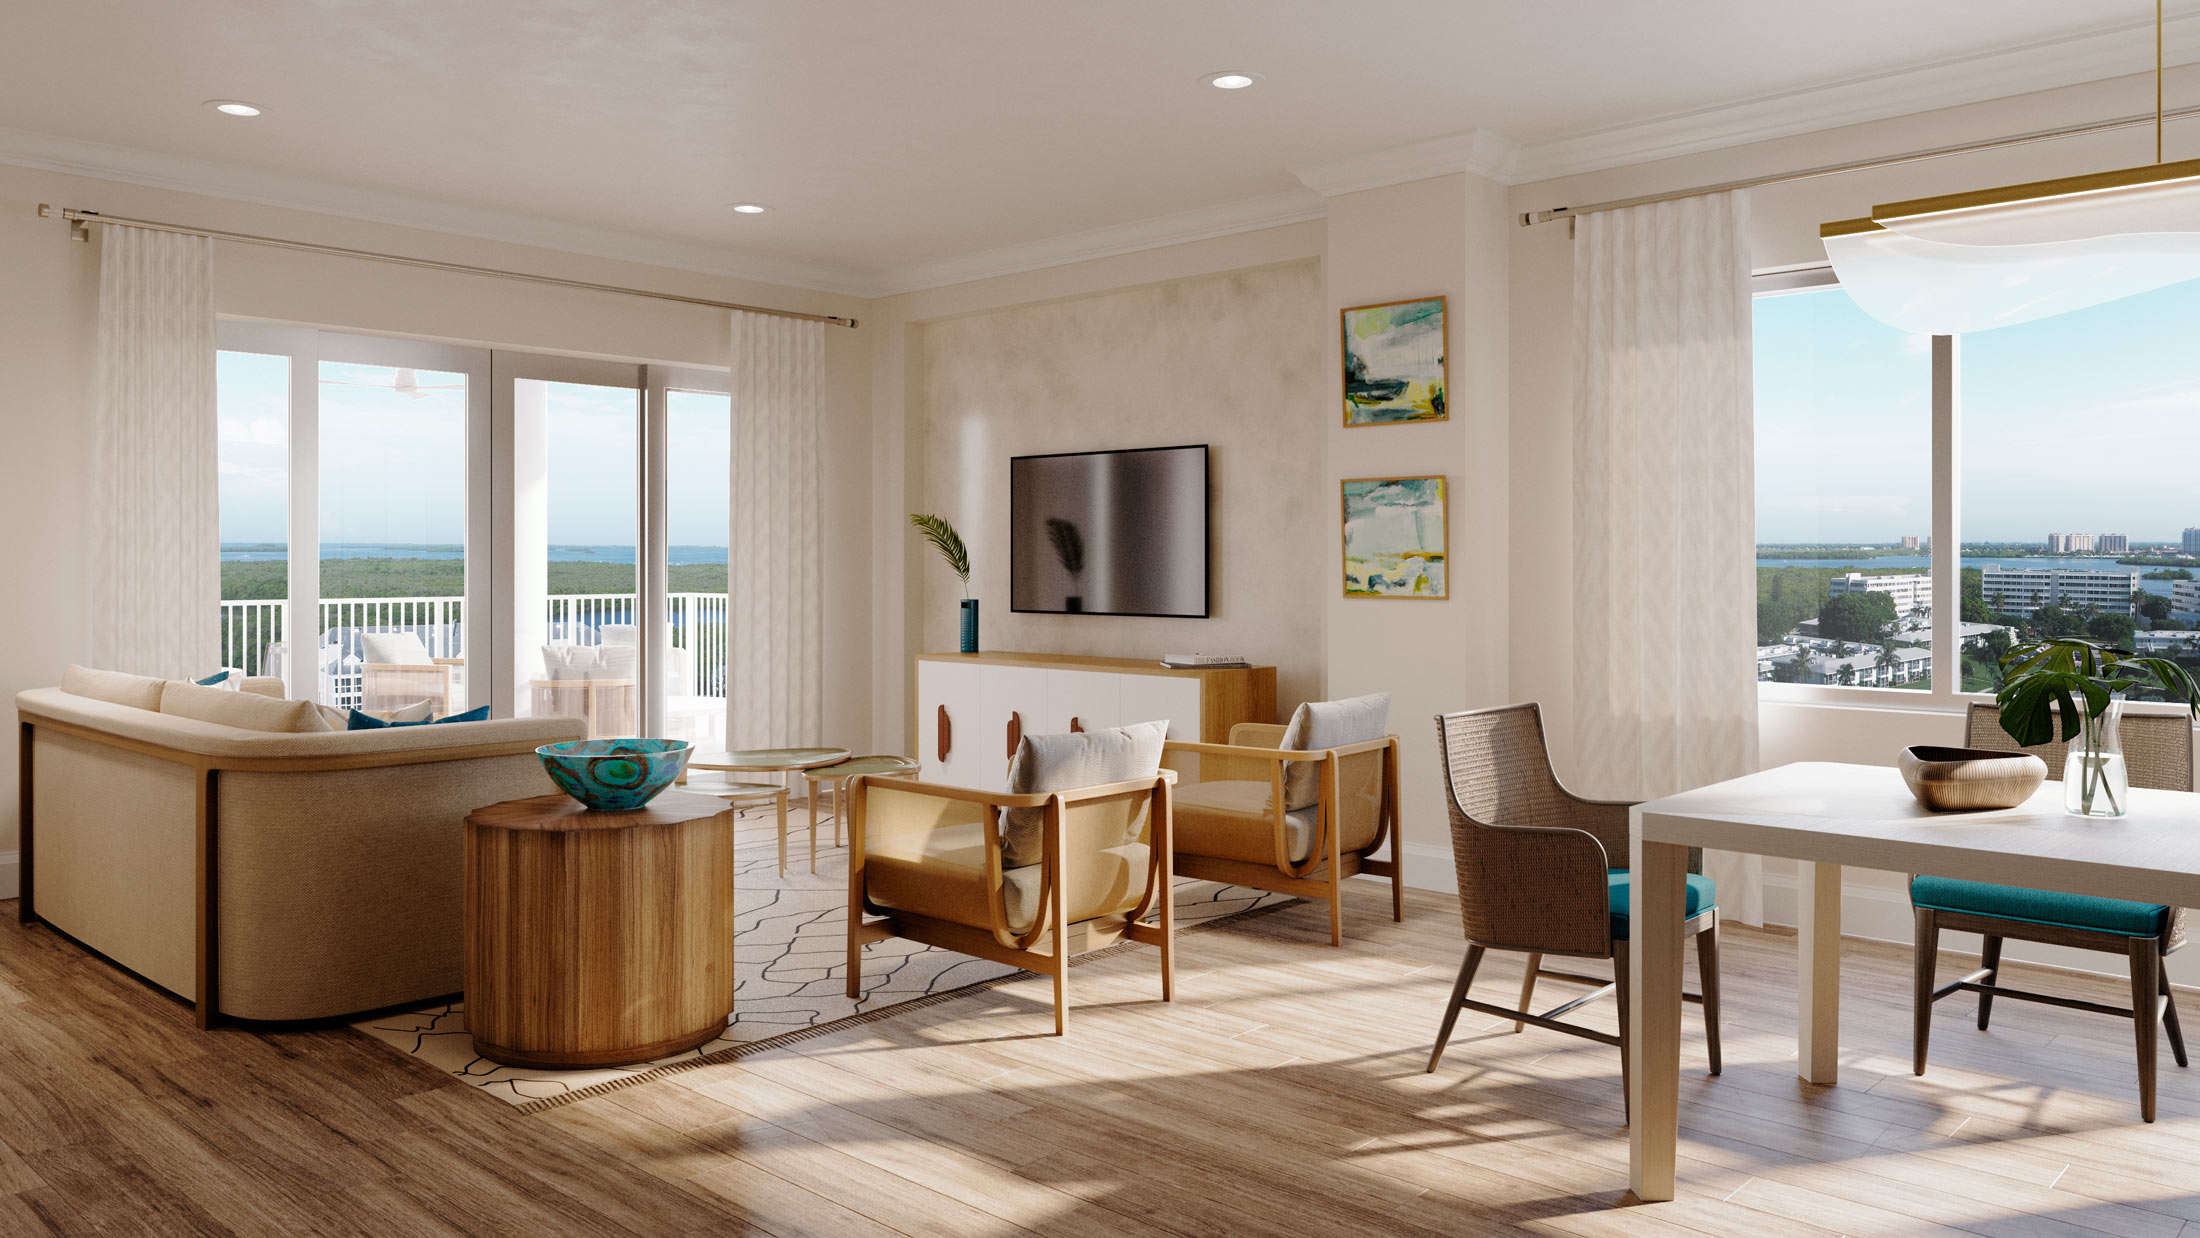 New Vista Cay Luxury Independent Living Facility at Shell Point ...